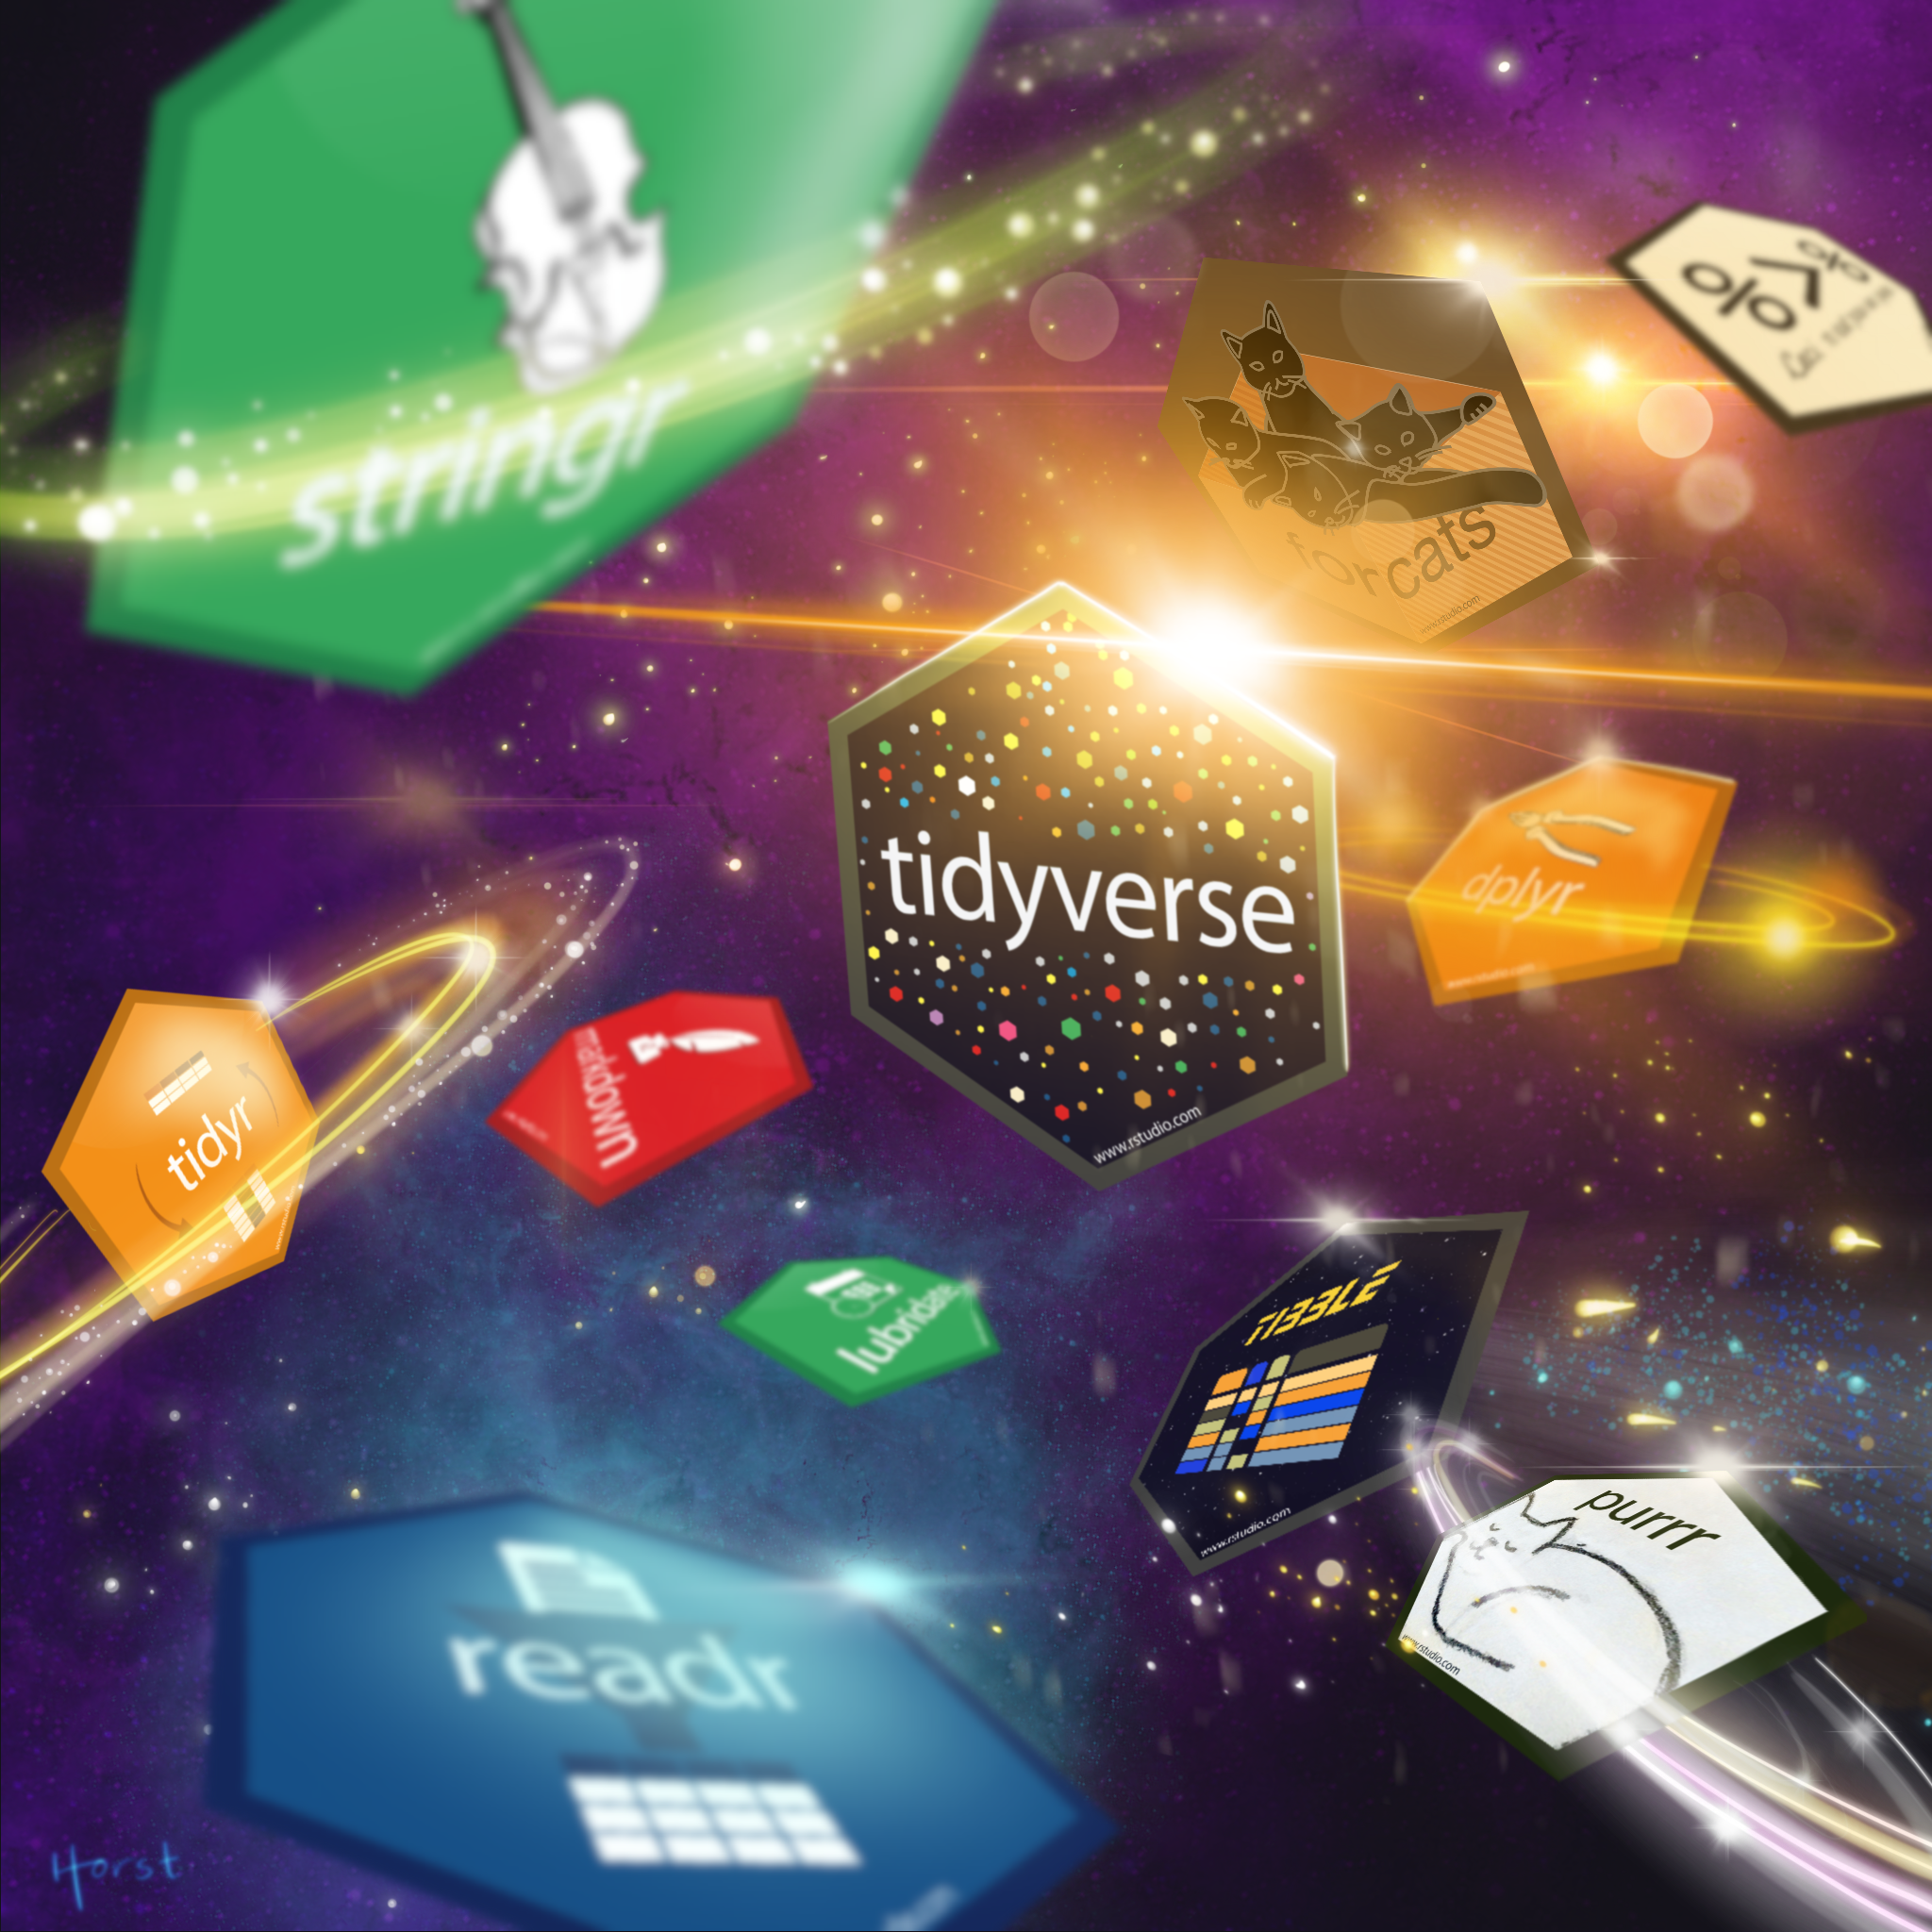 tidyverse introduction graphic. Source: [Allison Horst data science and stats illustrations](https://github.com/allisonhorst/stats-illustrations)